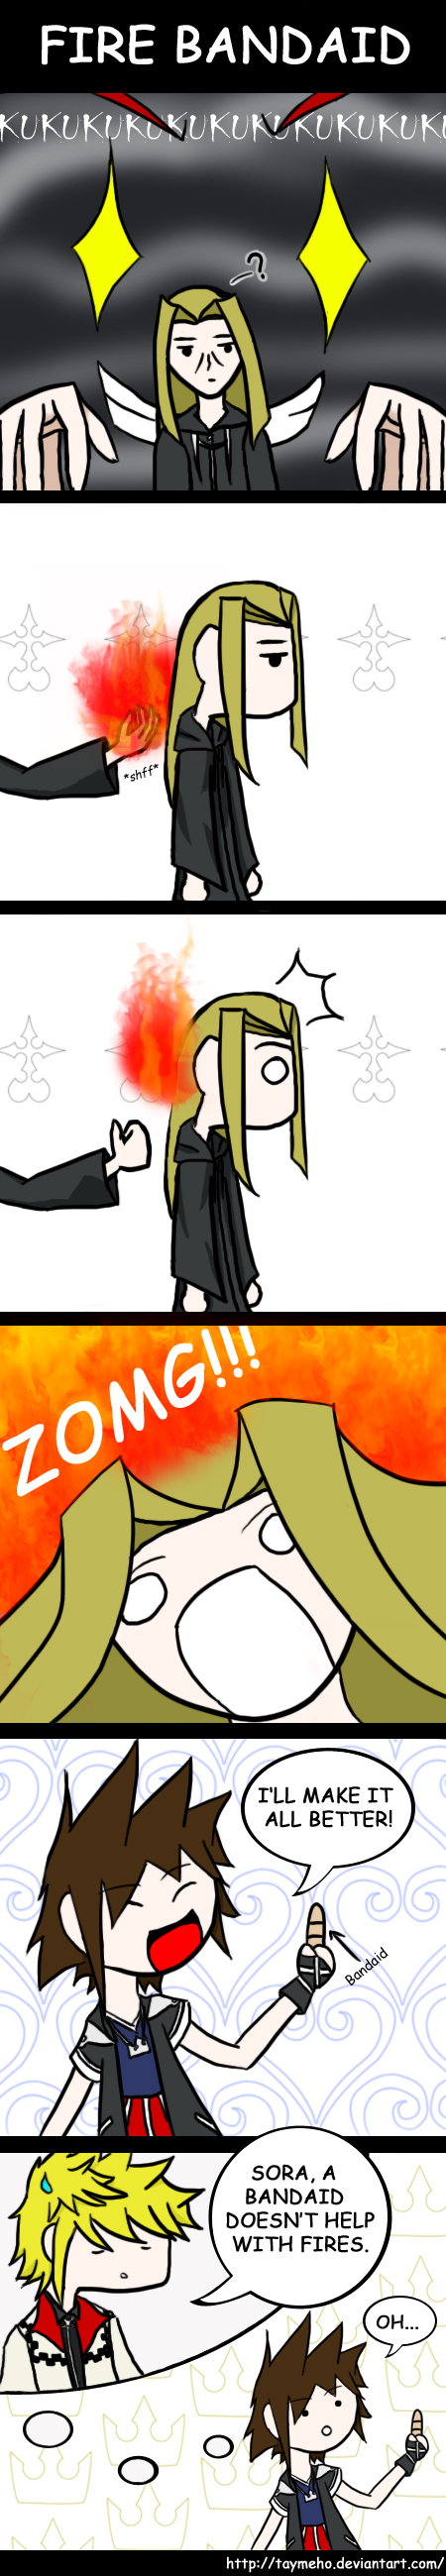 Fire Bandaid - KH Comic by MagicalSora